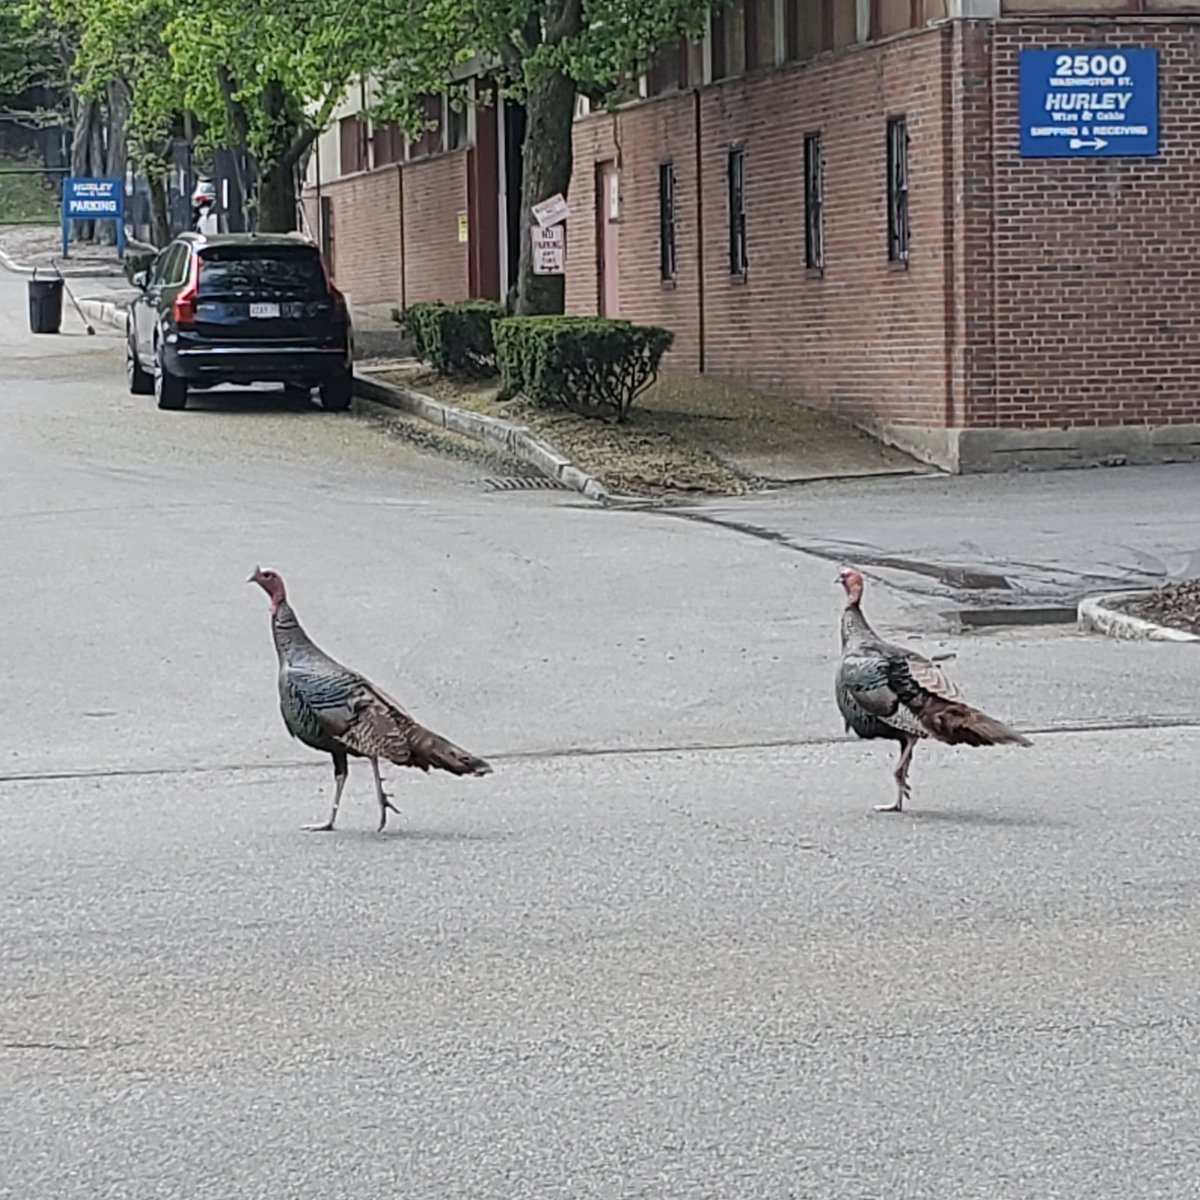 I have an announcement of a show coming up, but for now, enjoy two turkeys getting used to life in Roxbury.